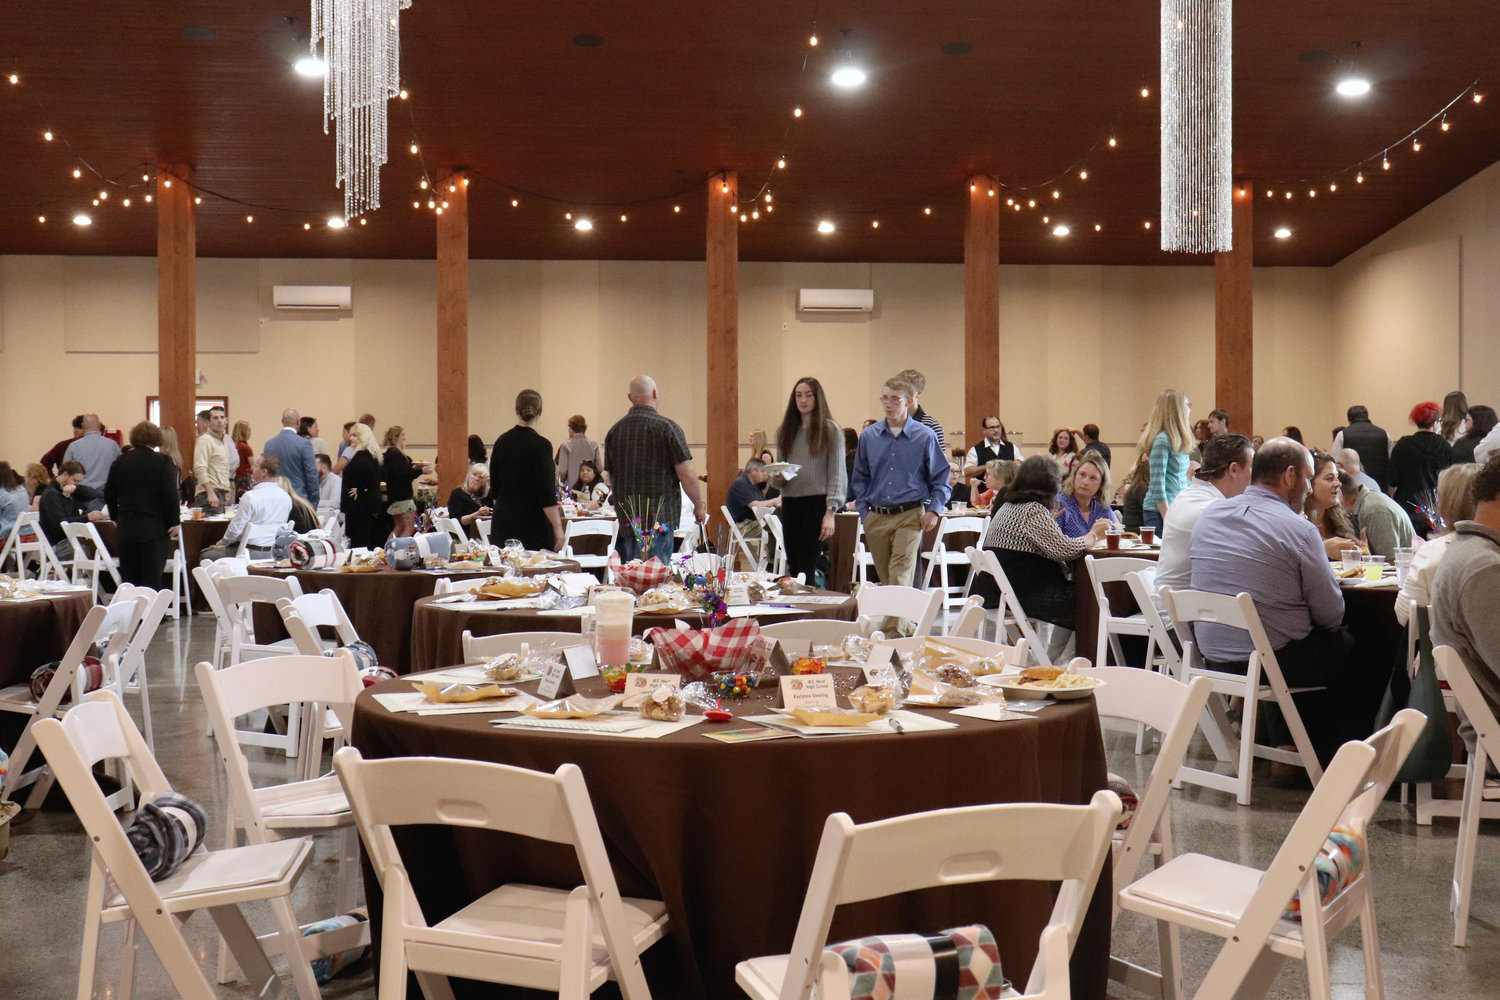 The Centralia-Chehalis Chamber of Commerce honored the top 25 graduating seniors from Centralia High School and W.F. West High School during a scholarship luncheon in Chehalis on Monday.